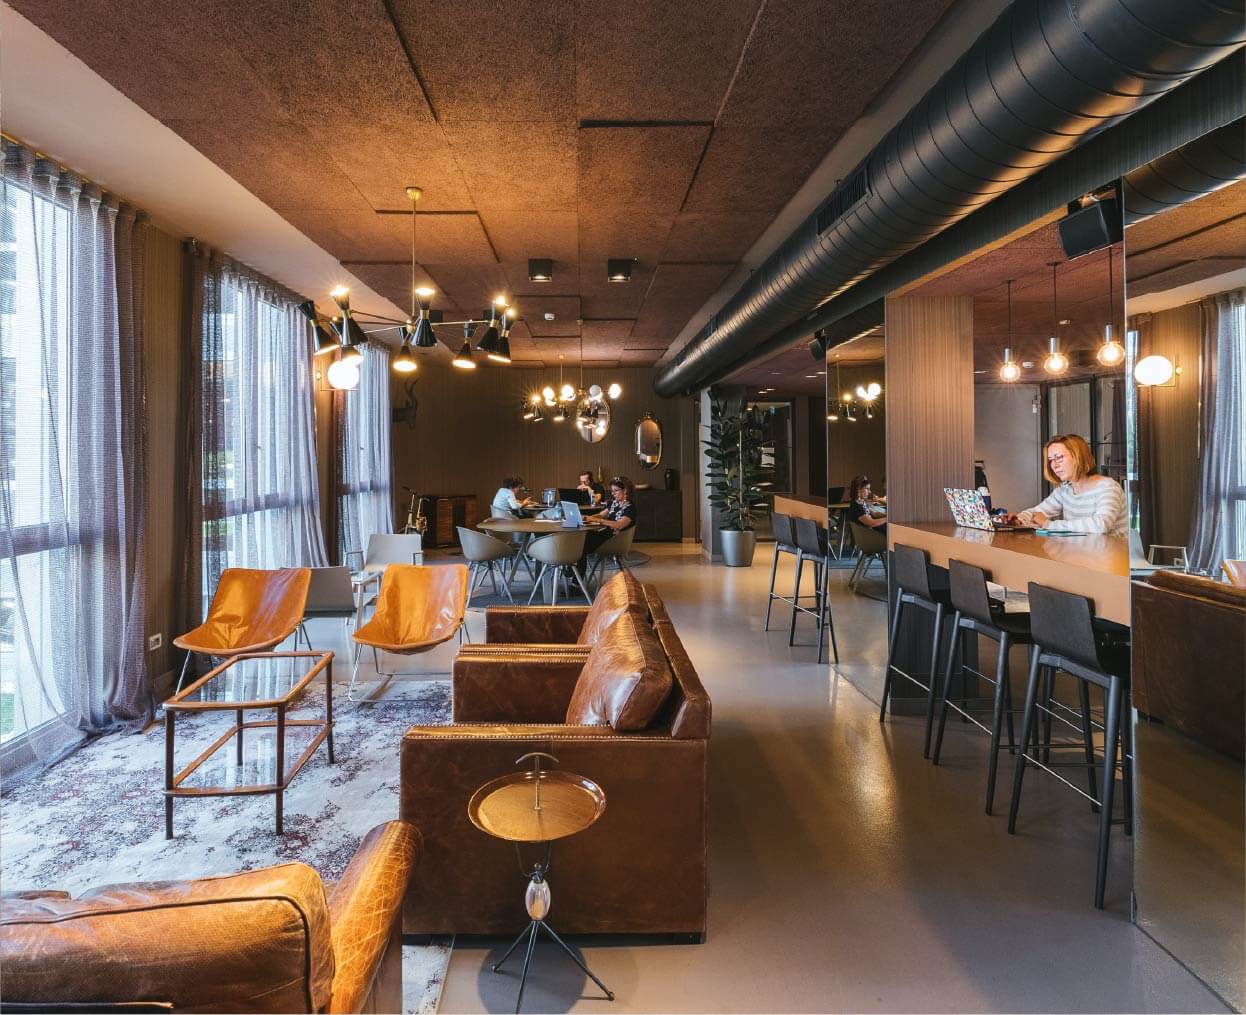 Coworking spaces in hotels | Six factors to consider | Mews Blog